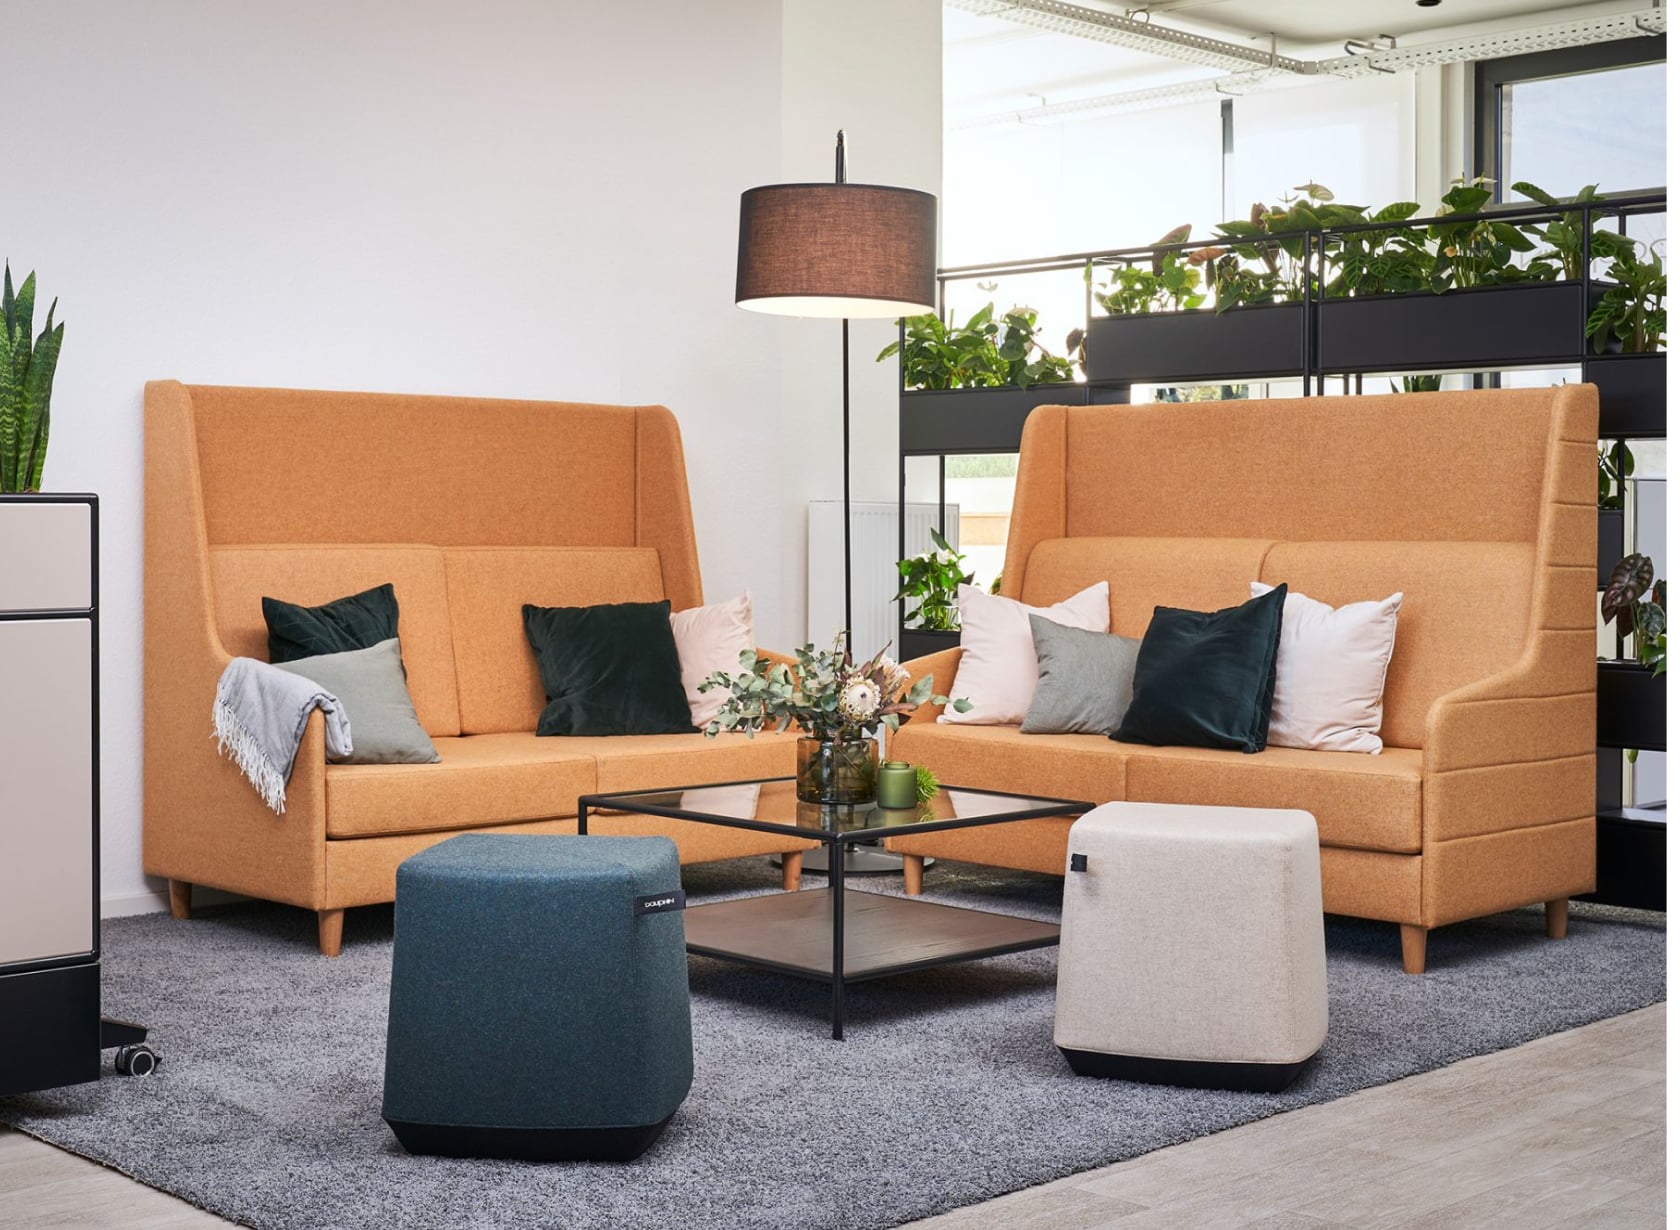 Inviting conversation space with two orange couches featuring privacy walls and adorned with decorative pillows. The sofas are accompanied by blue and beige ottomans to create a cozy space for collaboration.